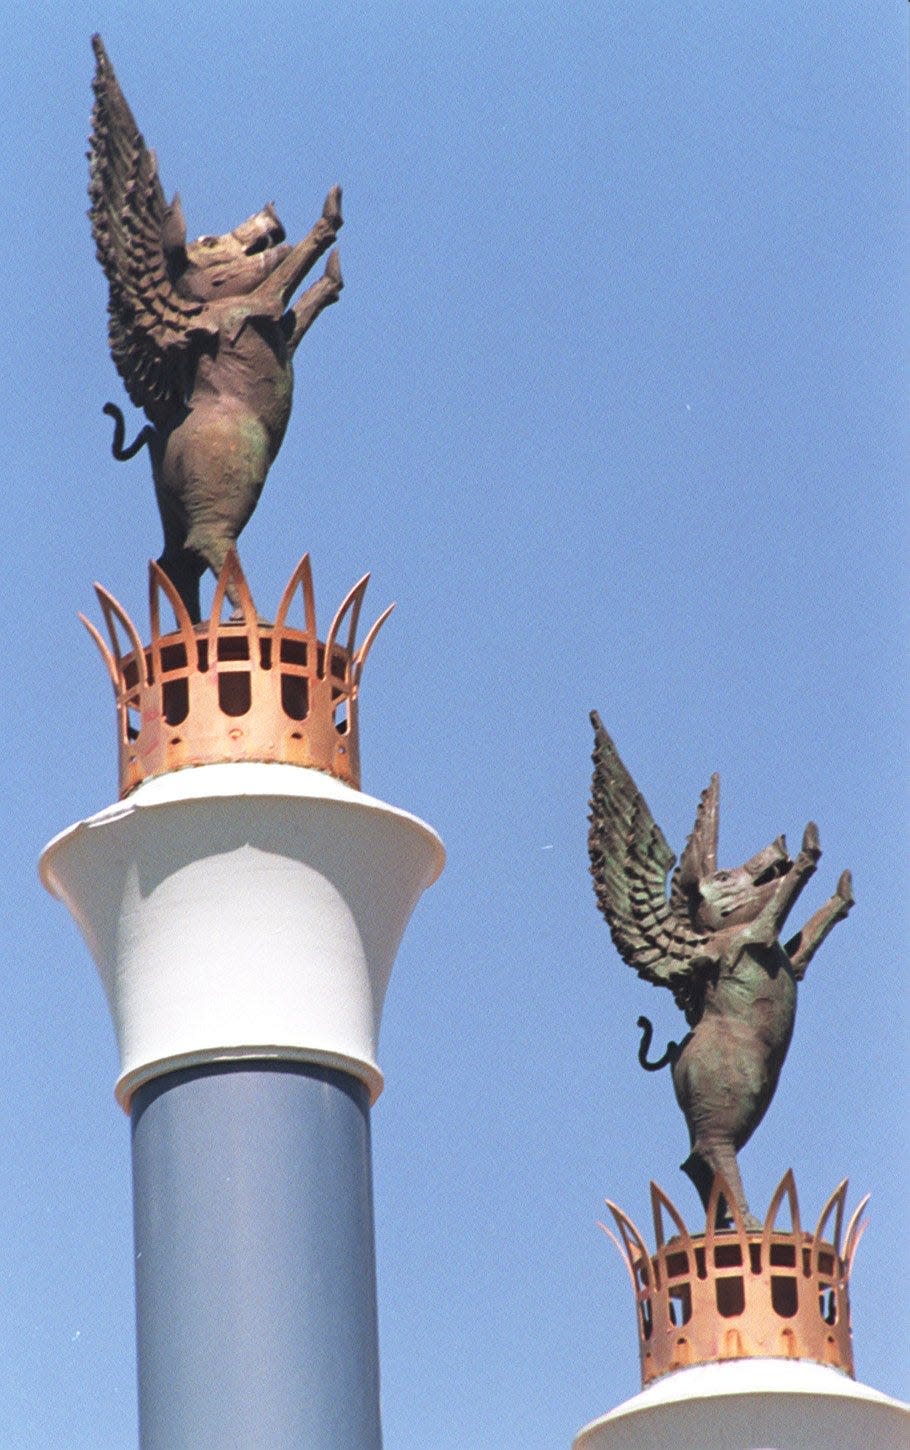 The flying pigs at the entrance of Bicentennial Park at Sawyer Point honor Cincinnati's past as "Porkopolis."